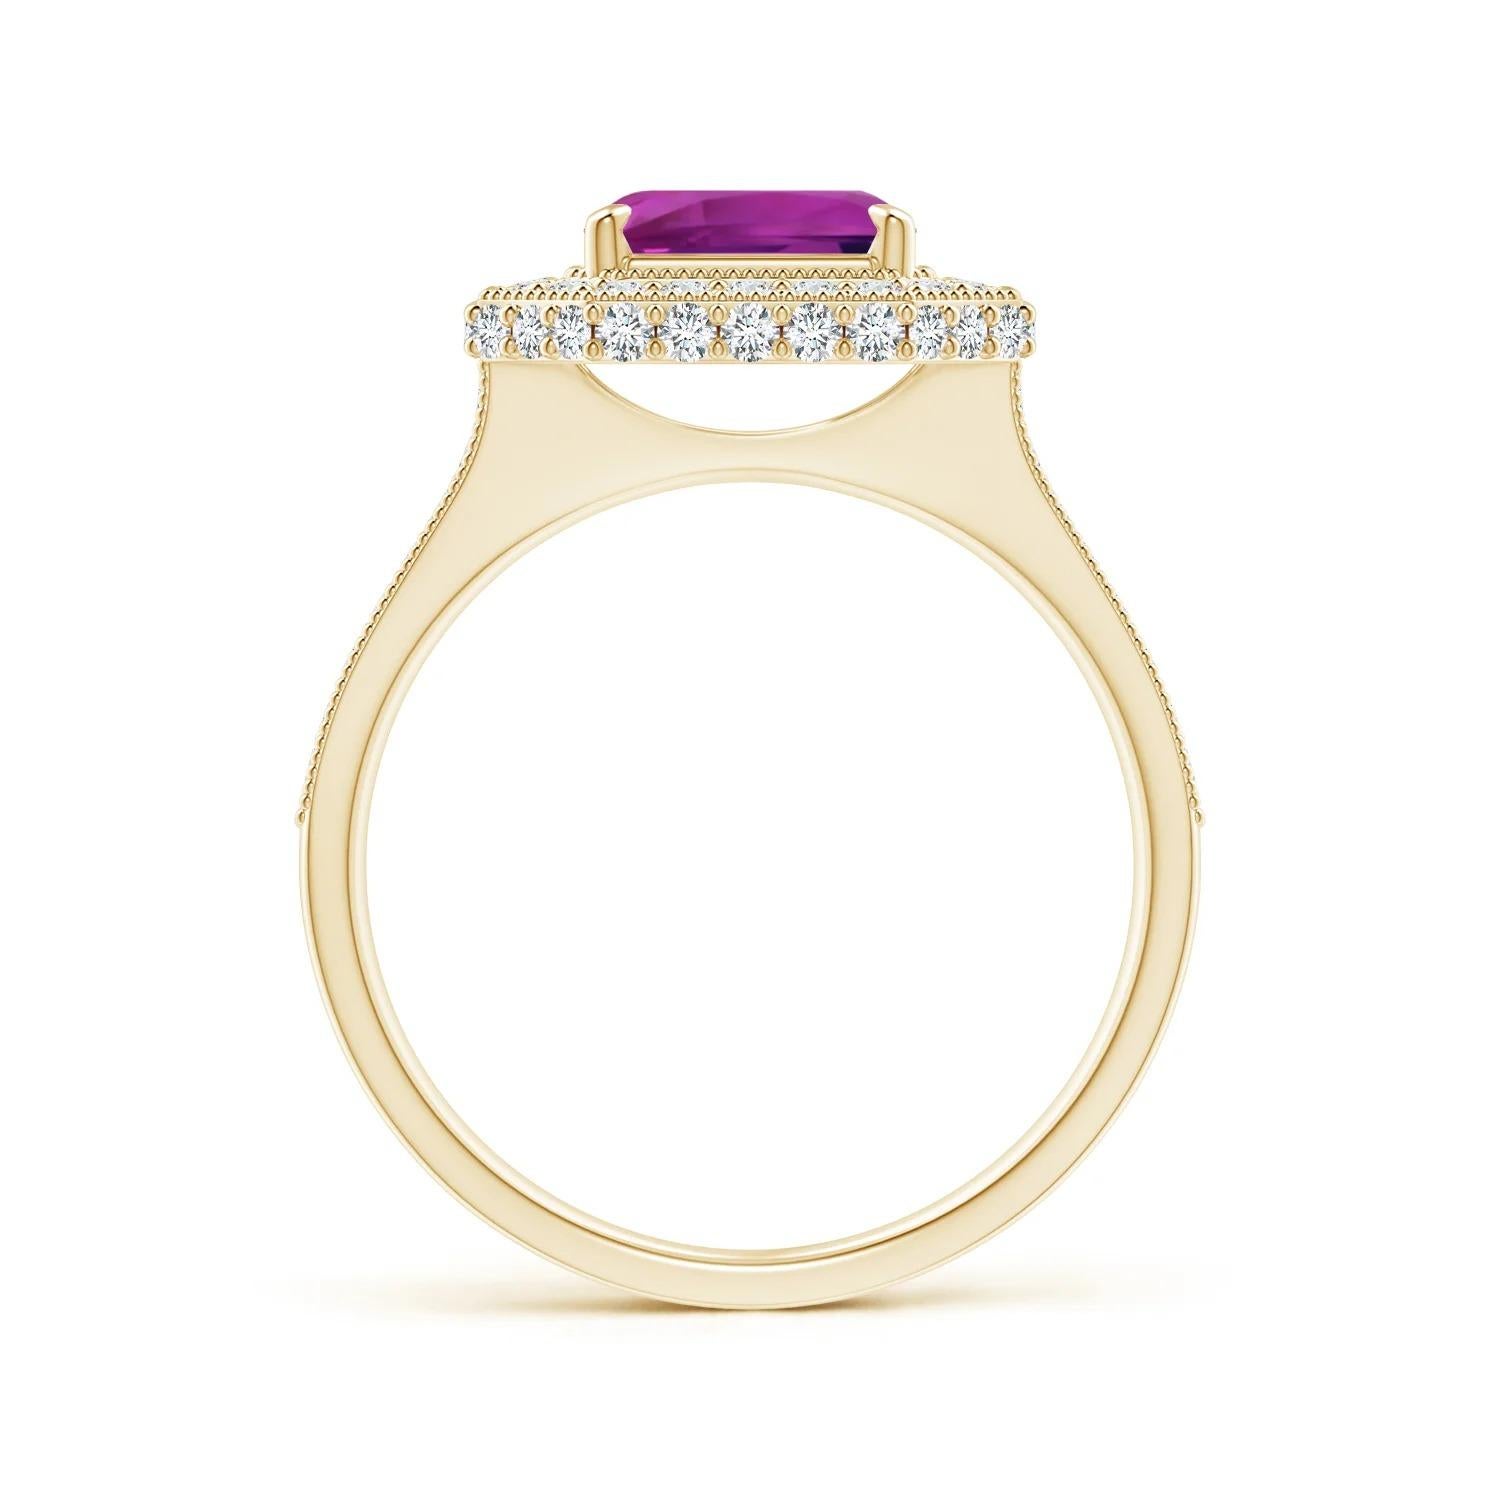 For Sale:  GIA Certified Natural Emerald Cut Pink Sapphire Halo Ring in Yellow Gold 2